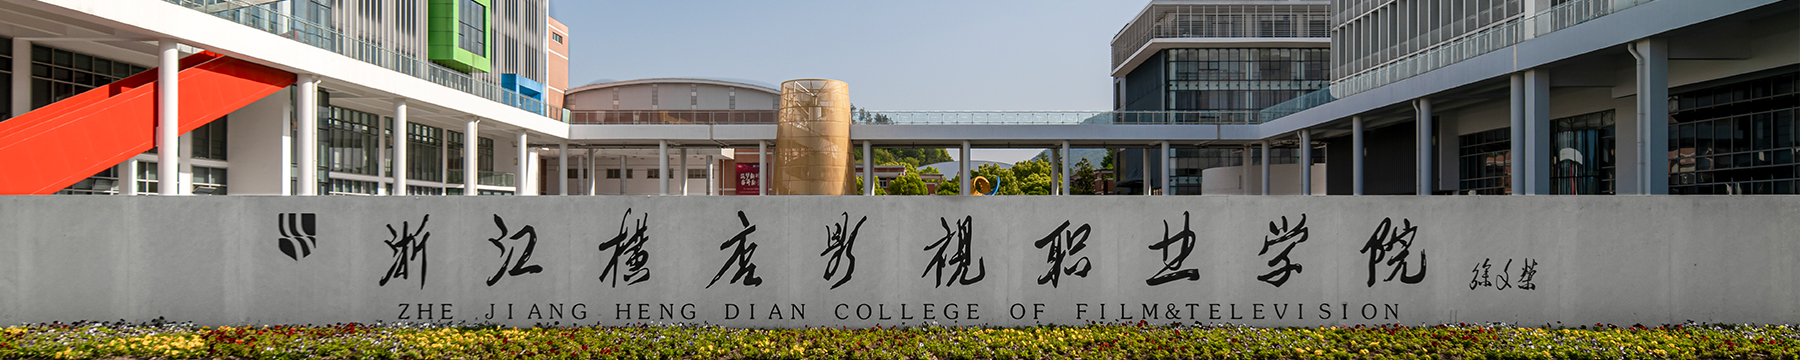 Hengdian College of Film & Television